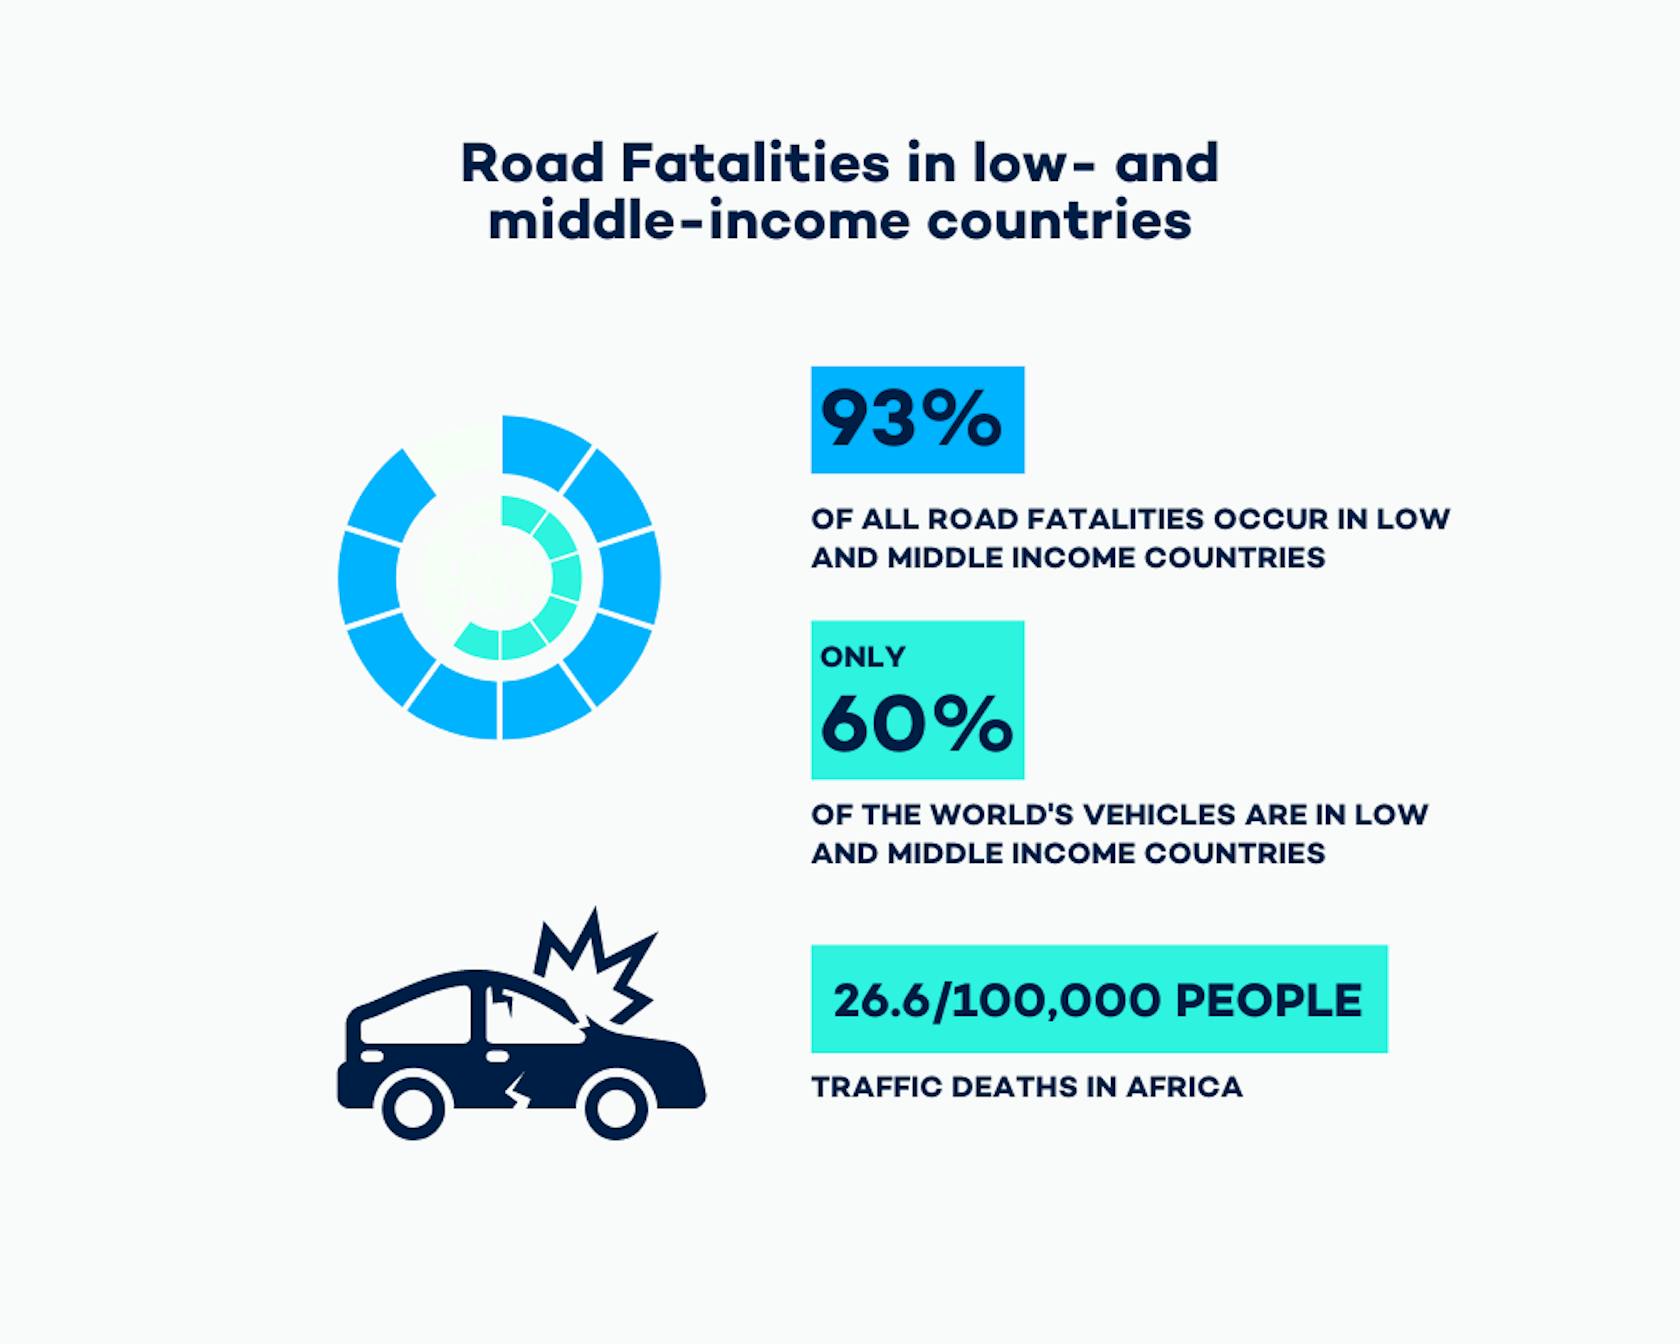 Road fatalities in middle-income countries